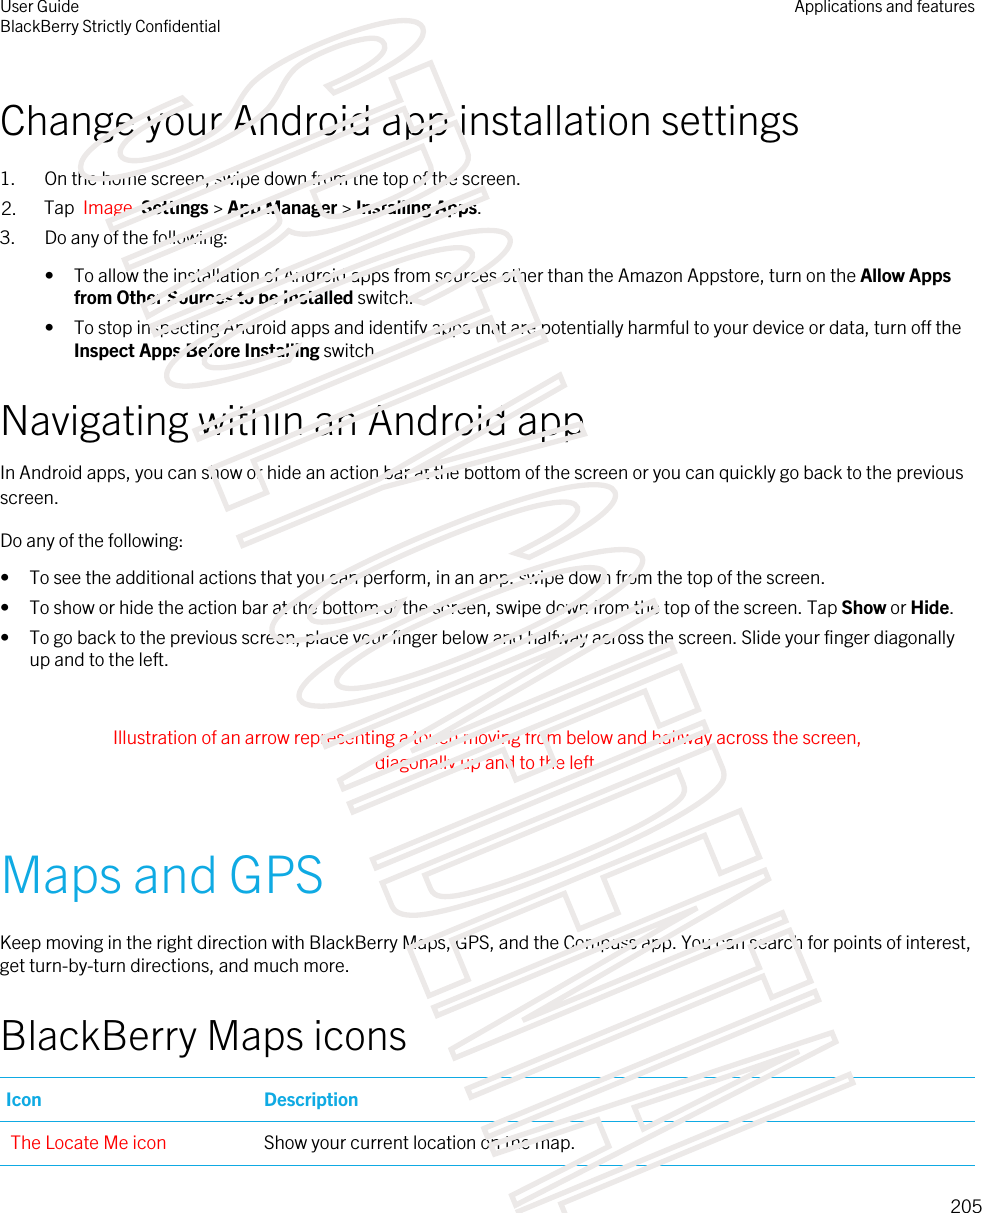 Change your Android app installation settings1. On the home screen, swipe down from the top of the screen.2. Tap  Image  Settings &gt; App Manager &gt; Installing Apps.3. Do any of the following:• To allow the installation of Android apps from sources other than the Amazon Appstore, turn on the Allow Apps from Other Sources to be Installed switch.• To stop inspecting Android apps and identify apps that are potentially harmful to your device or data, turn off the Inspect Apps Before Installing switch.Navigating within an Android appIn Android apps, you can show or hide an action bar at the bottom of the screen or you can quickly go back to the previous screen.Do any of the following:• To see the additional actions that you can perform, in an app, swipe down from the top of the screen.• To show or hide the action bar at the bottom of the screen, swipe down from the top of the screen. Tap Show or Hide.• To go back to the previous screen, place your finger below and halfway across the screen. Slide your finger diagonally up and to the left. Illustration of an arrow representing a touch moving from below and halfway across the screen, diagonally up and to the left. Maps and GPSKeep moving in the right direction with BlackBerry Maps, GPS, and the Compass app. You can search for points of interest, get turn-by-turn directions, and much more.BlackBerry Maps iconsIcon DescriptionThe Locate Me icon Show your current location on the map.User GuideBlackBerry Strictly Confidential Applications and features205STRICTLY CONFIDENTIAL